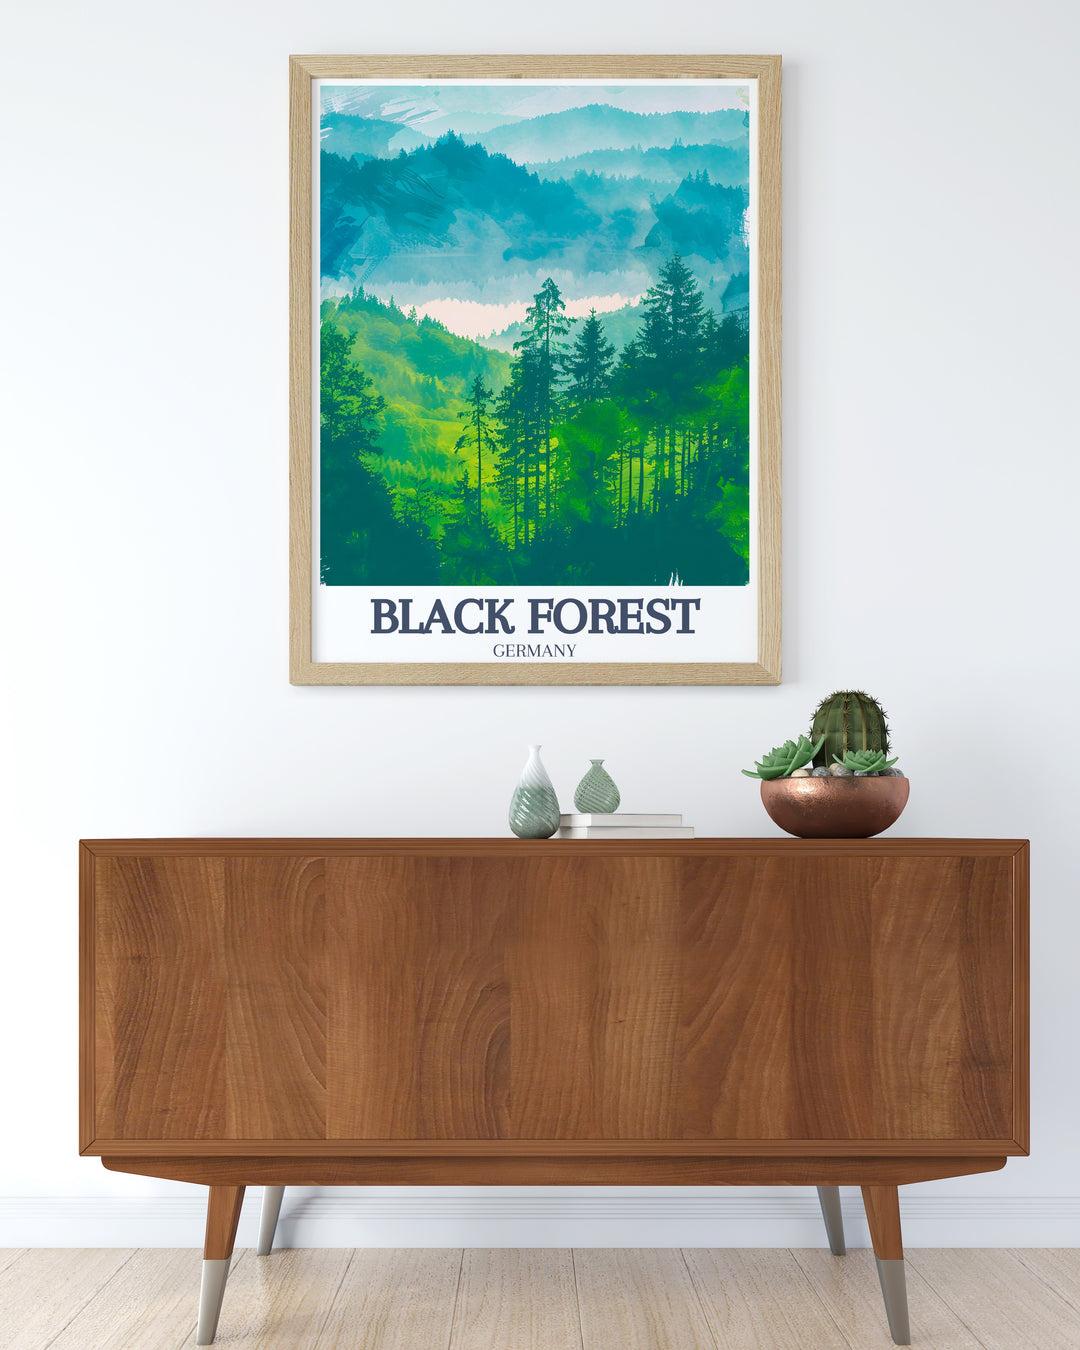 A mesmerizing Schwarzwald Print of Mummelsee Lake, Baden Wurttemberg perfect for adding a touch of natures beauty to any room this Black Forest Artwork makes an ideal gift for travelers and nature enthusiasts looking to bring a piece of Germanys enchanting forest into their home